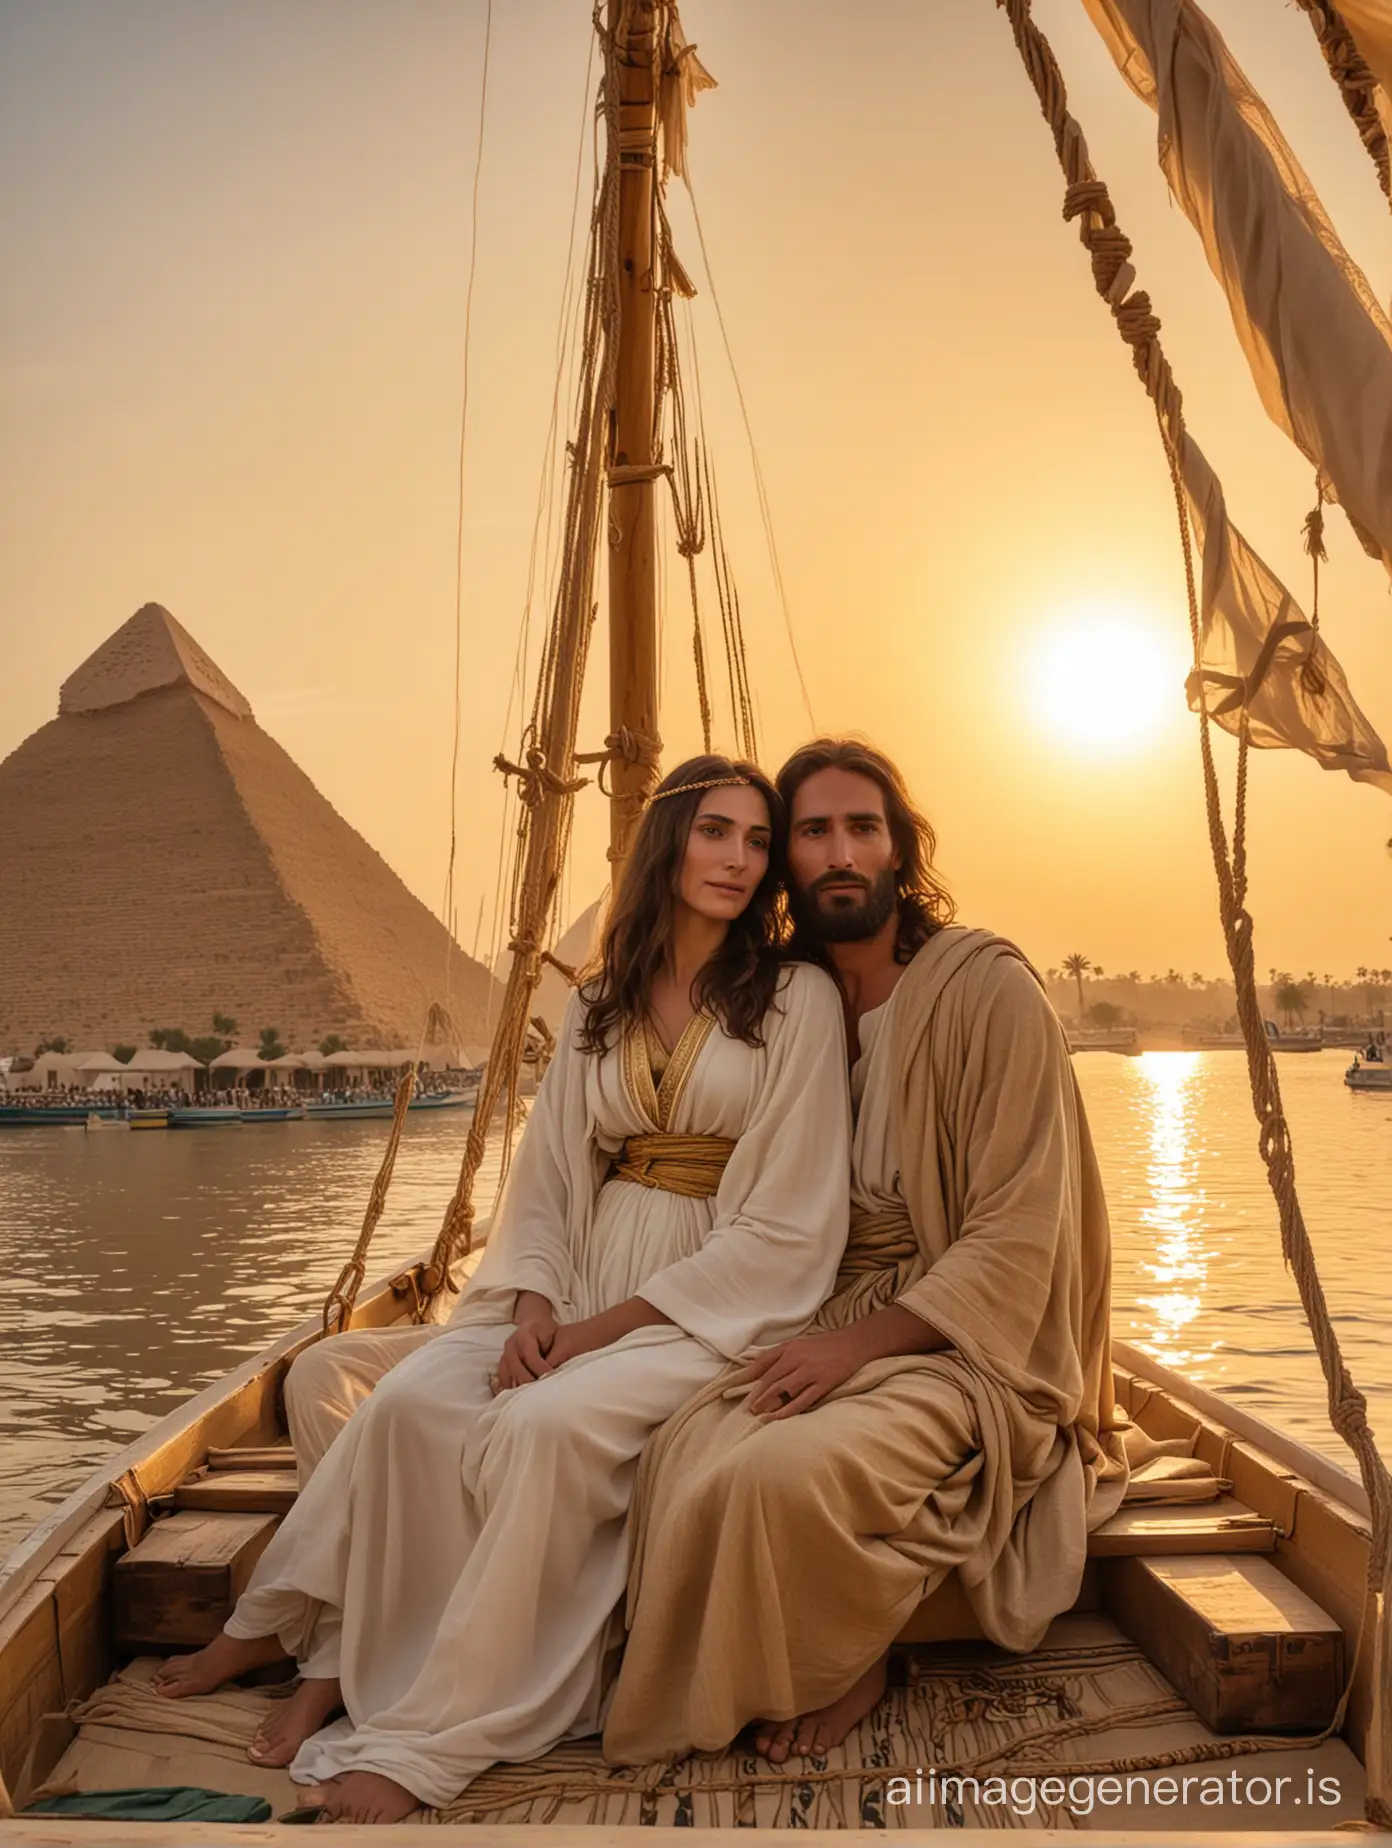 mary magdalene and jesus with a radiant golden glow, sitting in a felucca that passes by the pyramids